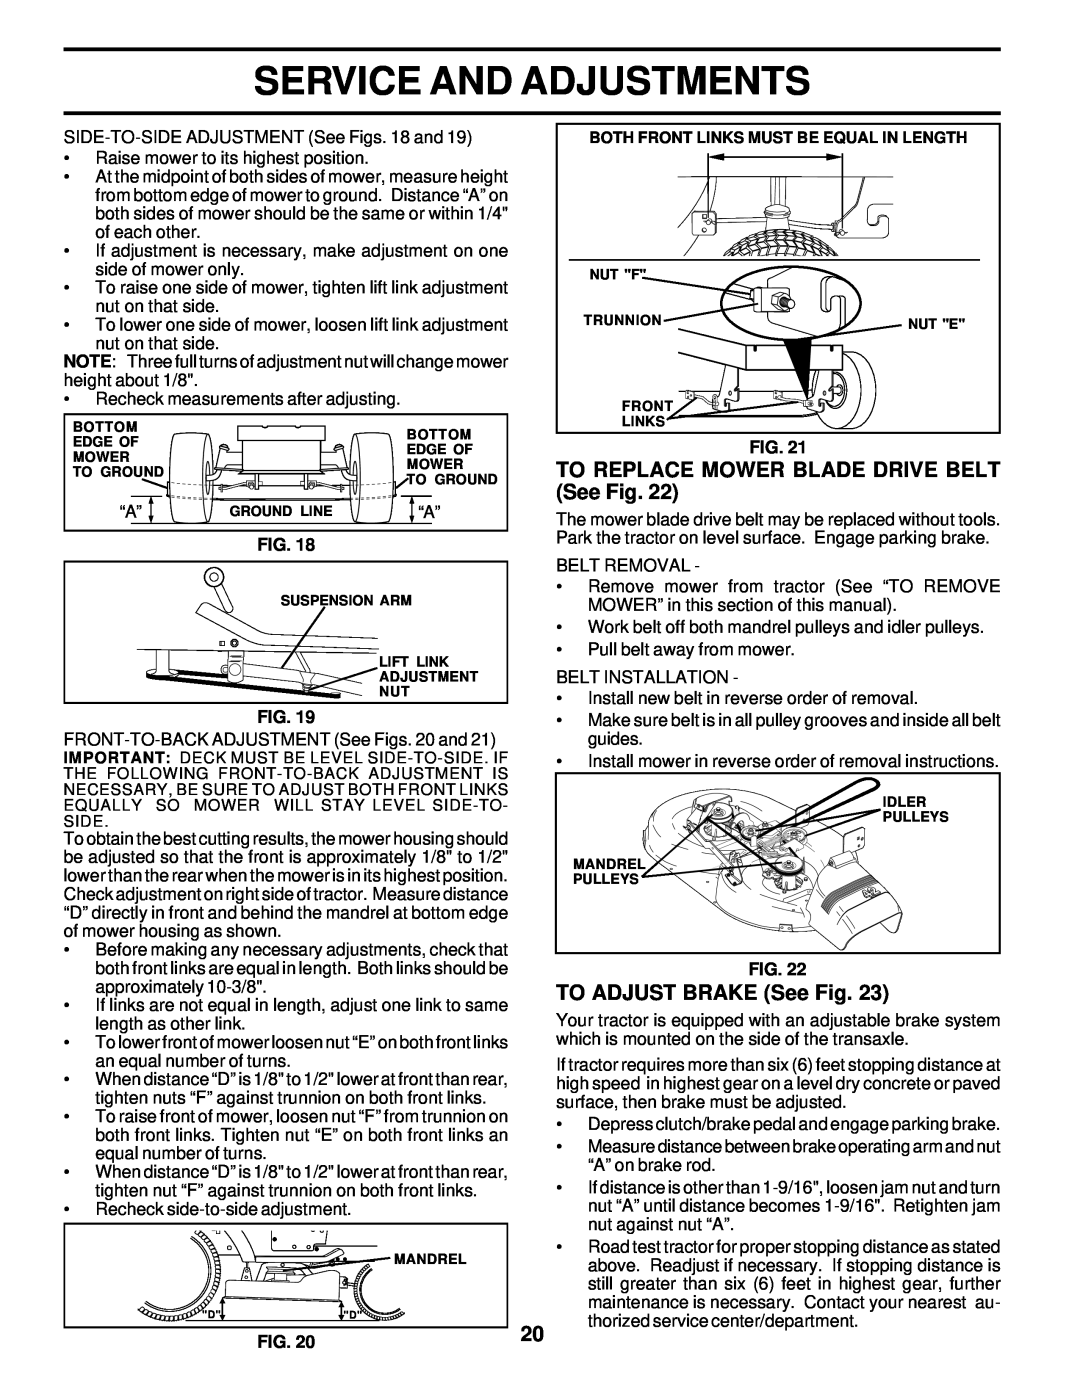 Poulan PRK17H42STA owner manual TO REPLACE MOWER BLADE DRIVE BELT See Fig, TO ADJUST BRAKE See Fig, Service And Adjustments 